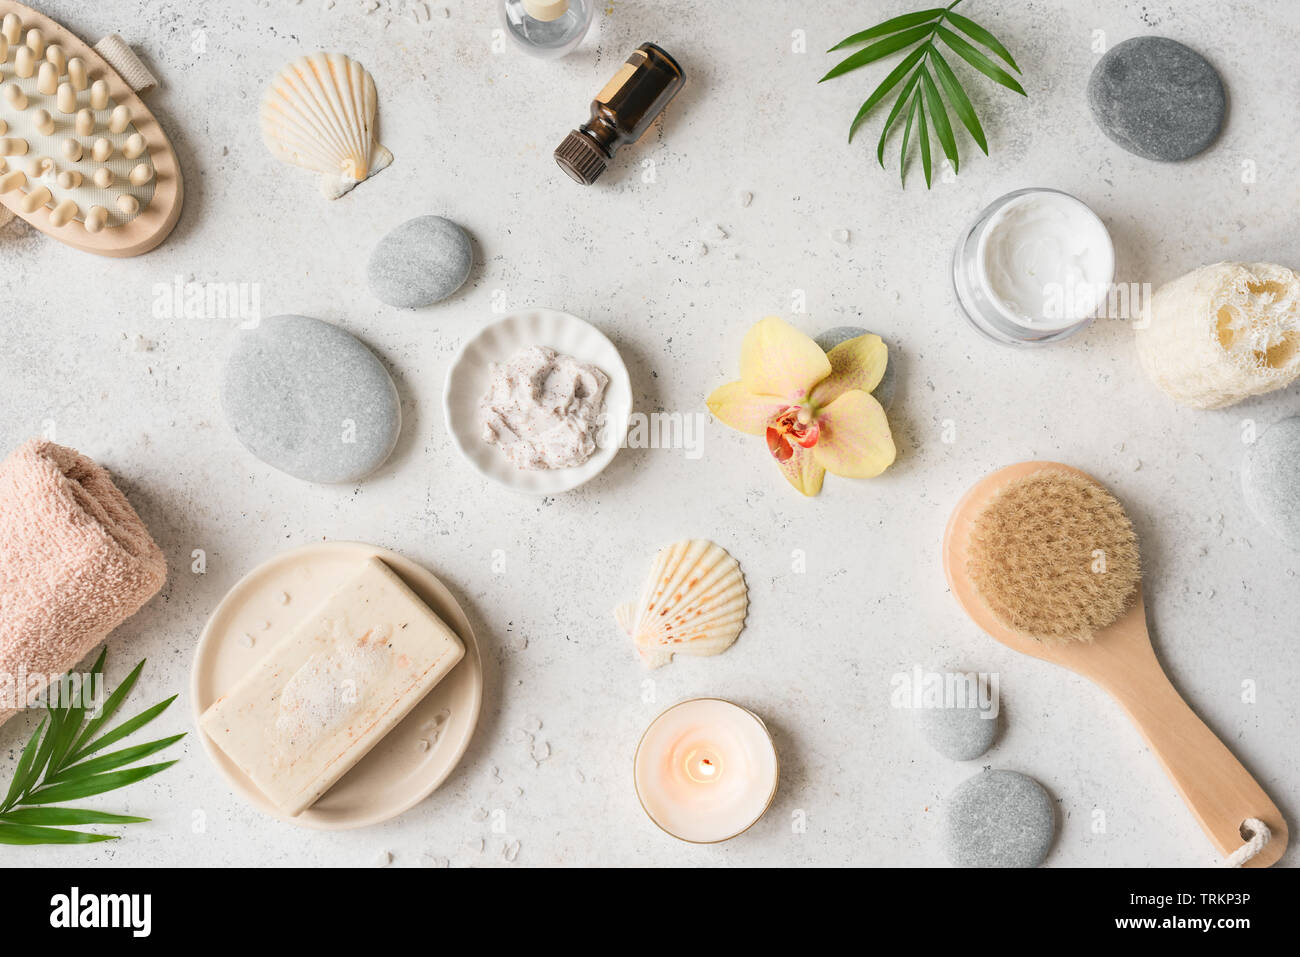 Spa concept, flat lay on white stone background, palm leaves, flower, candle and zen like grey stones, top view. Stock Photo